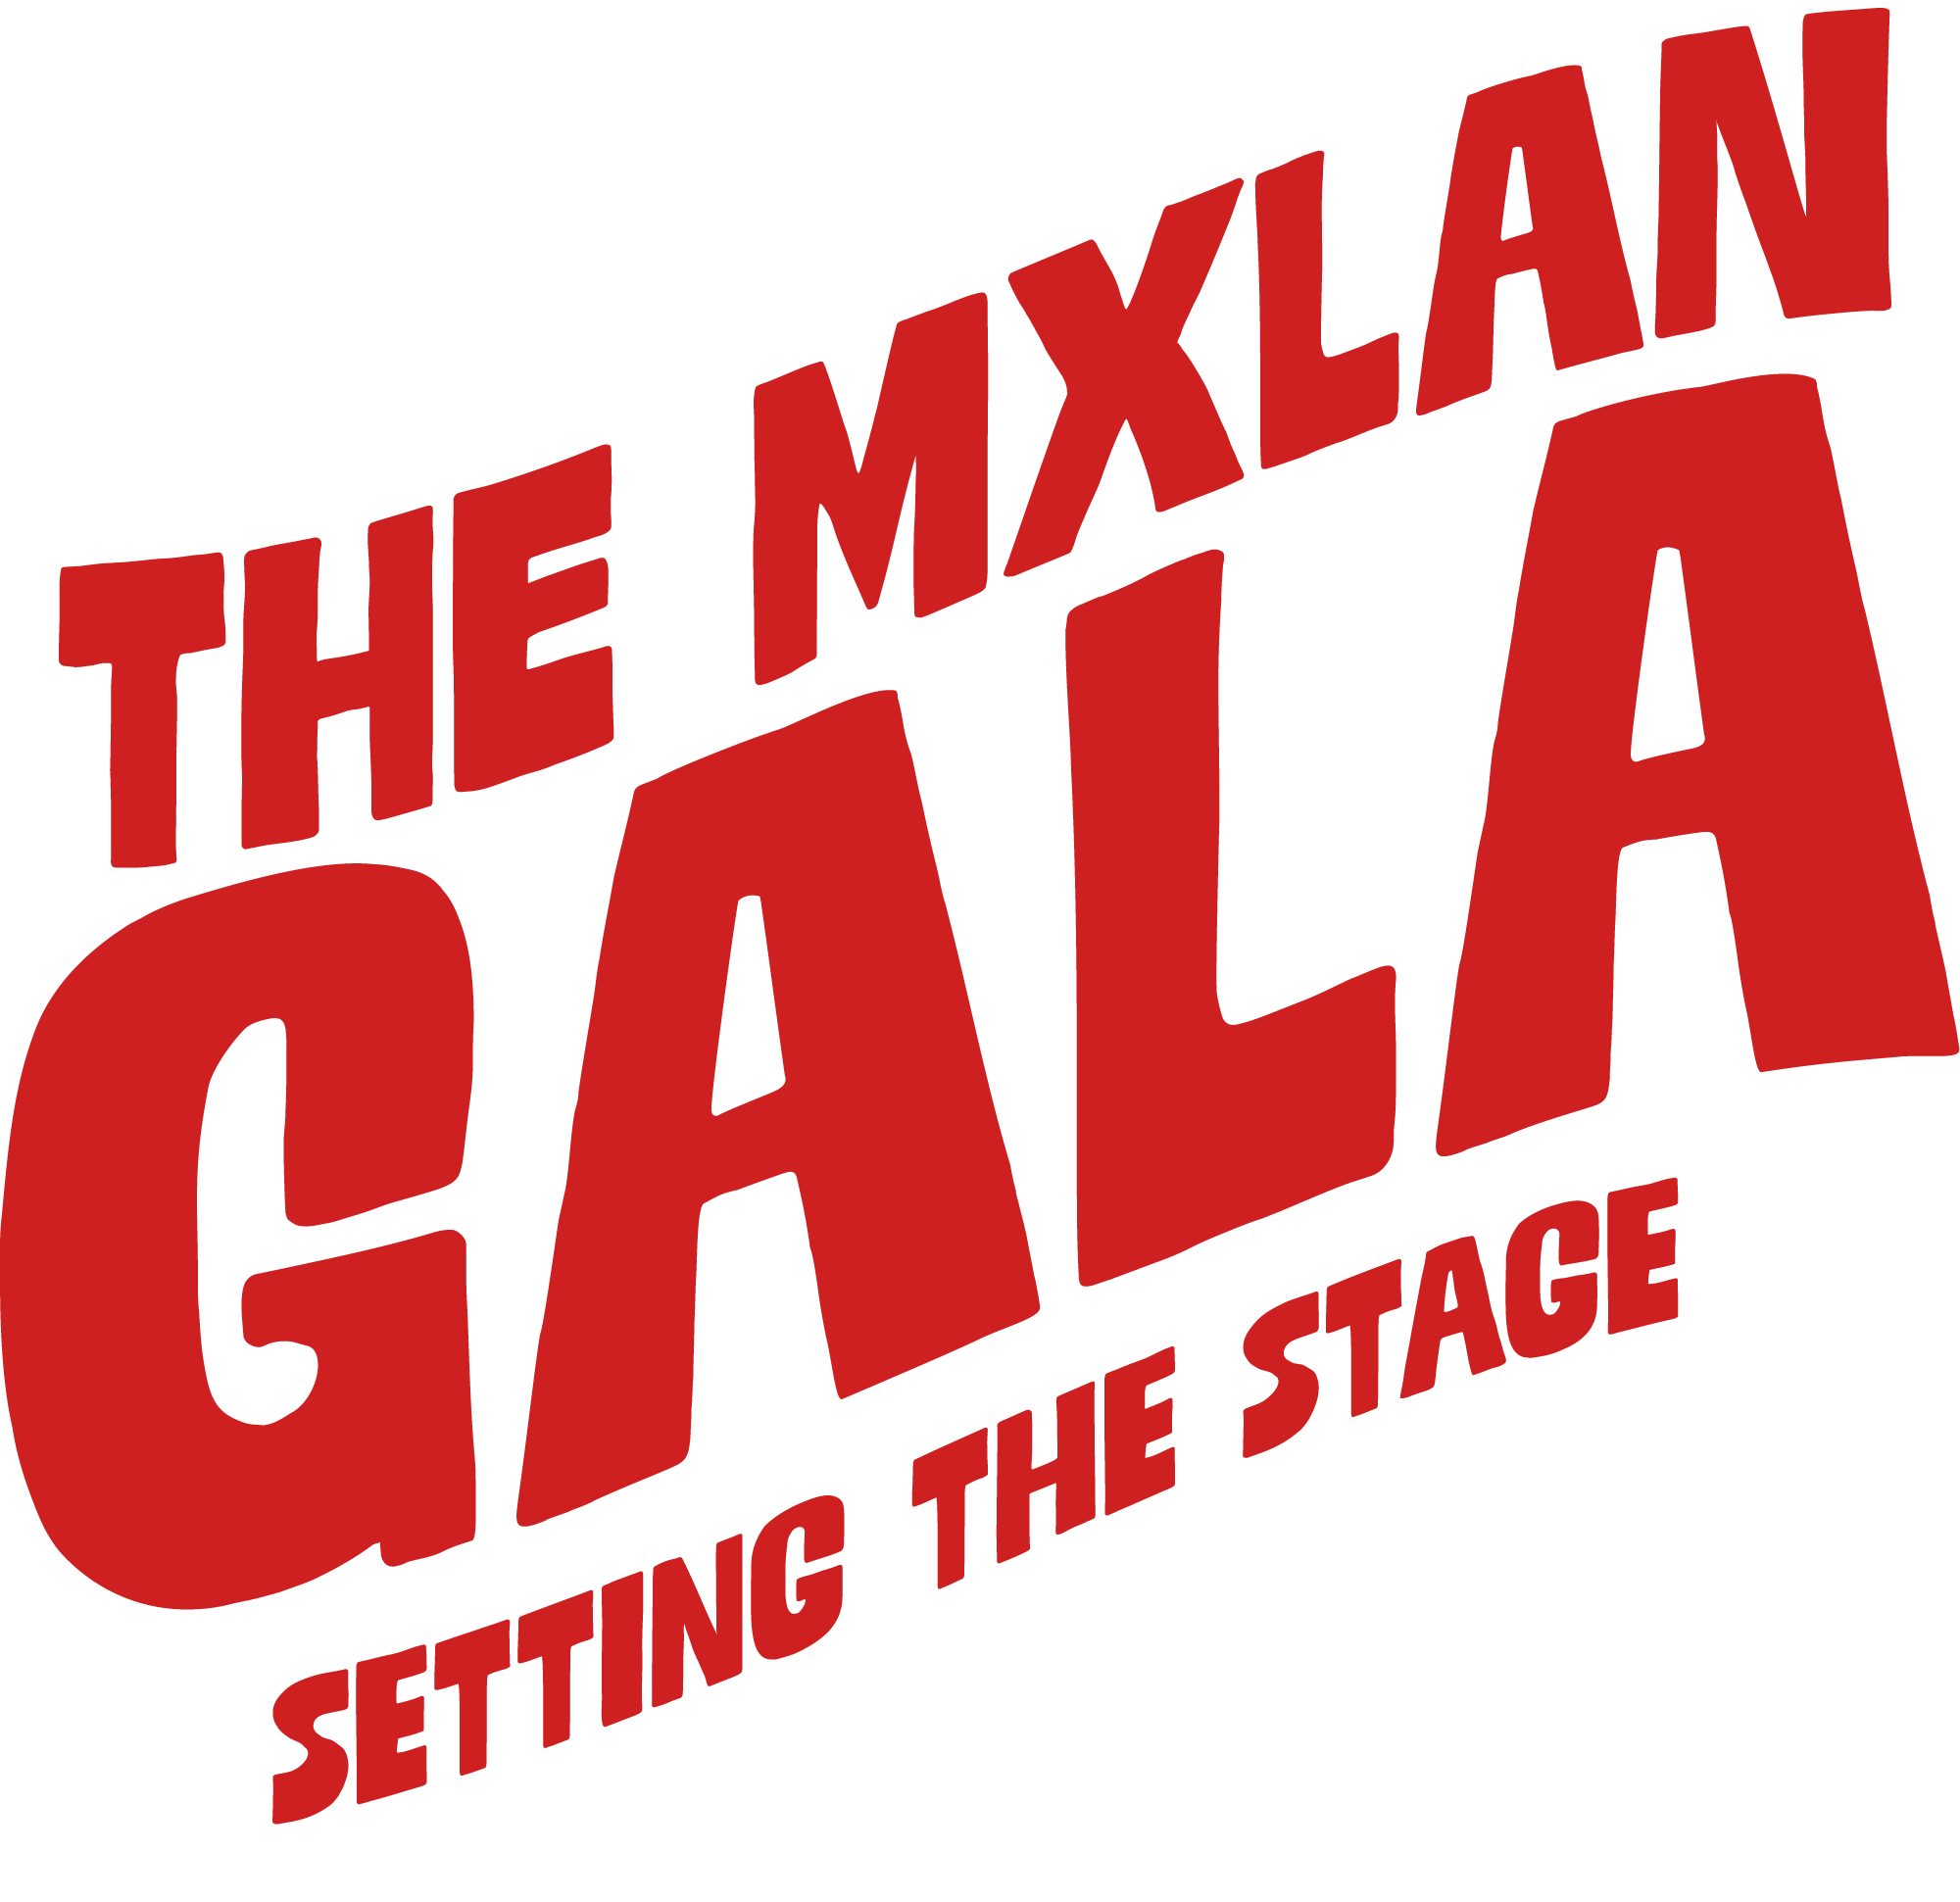 mxlan gala festival creator in motion mcallen latino latinx music arts best fesitval in texas acl south by south west coachella rio grande valley south padre island brownsville indie best latino festival in us breakthrough stage